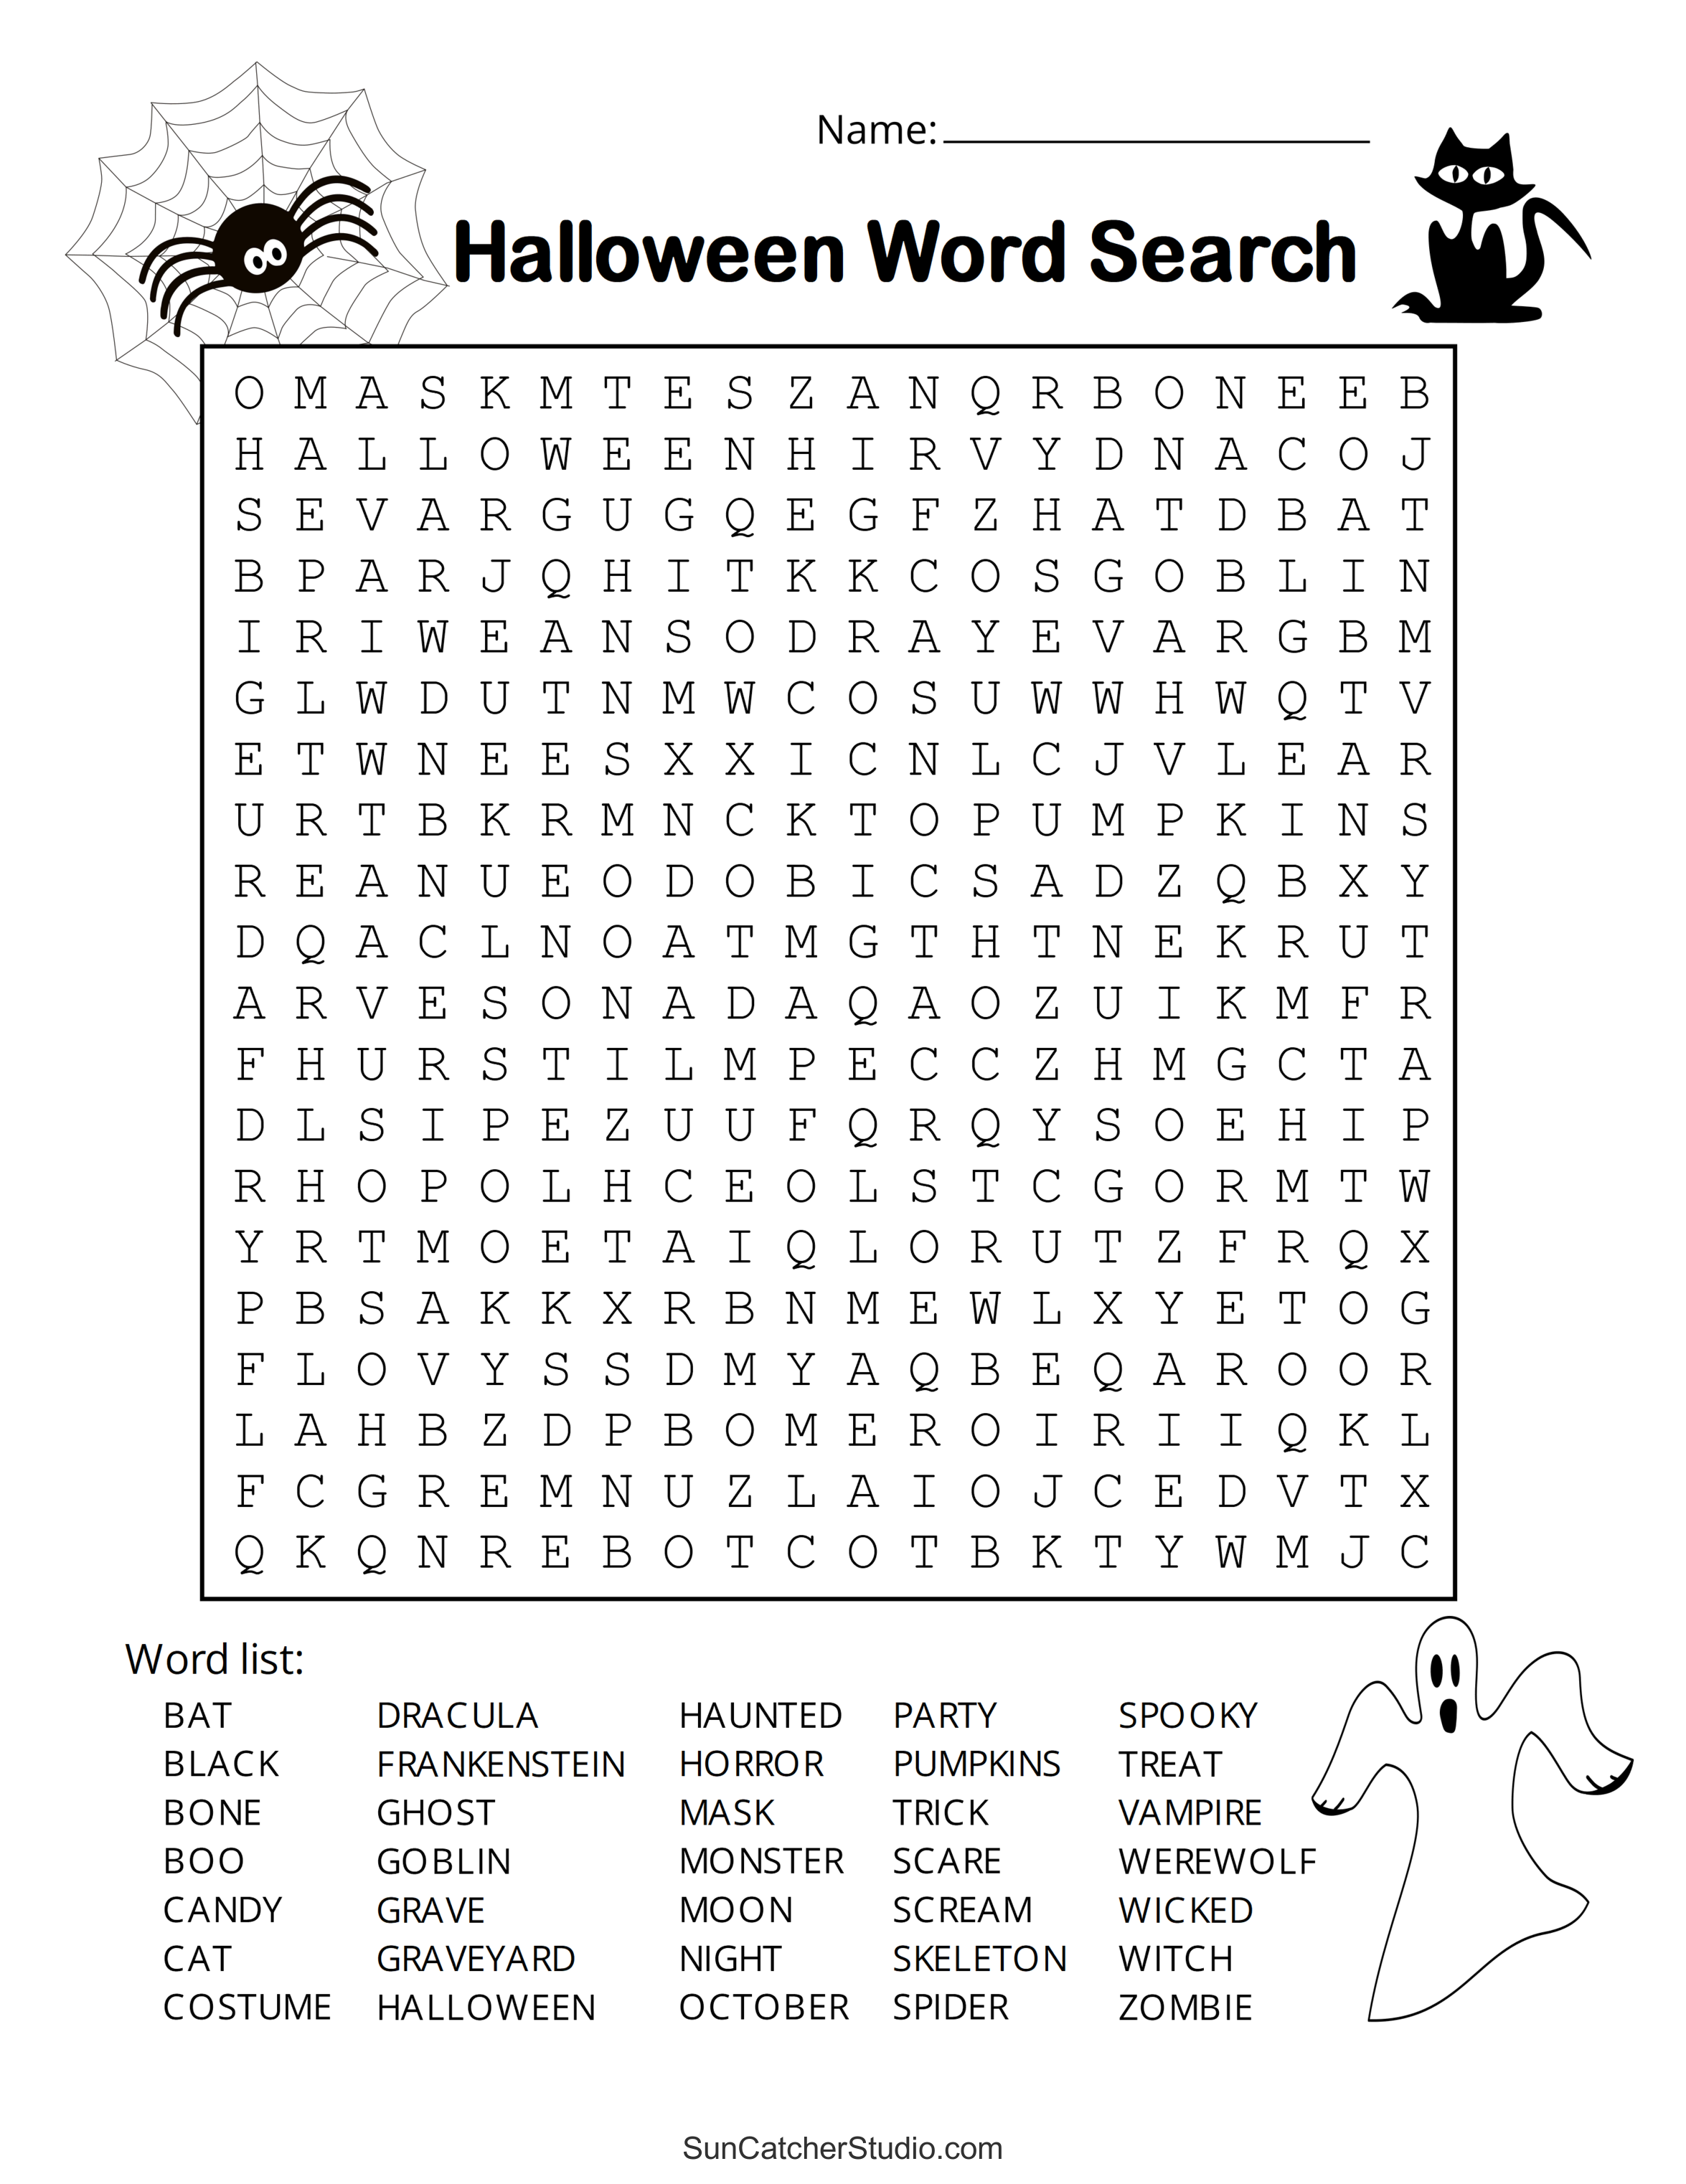 halloween-word-search-free-printable-puzzles-diy-projects-patterns-monograms-designs